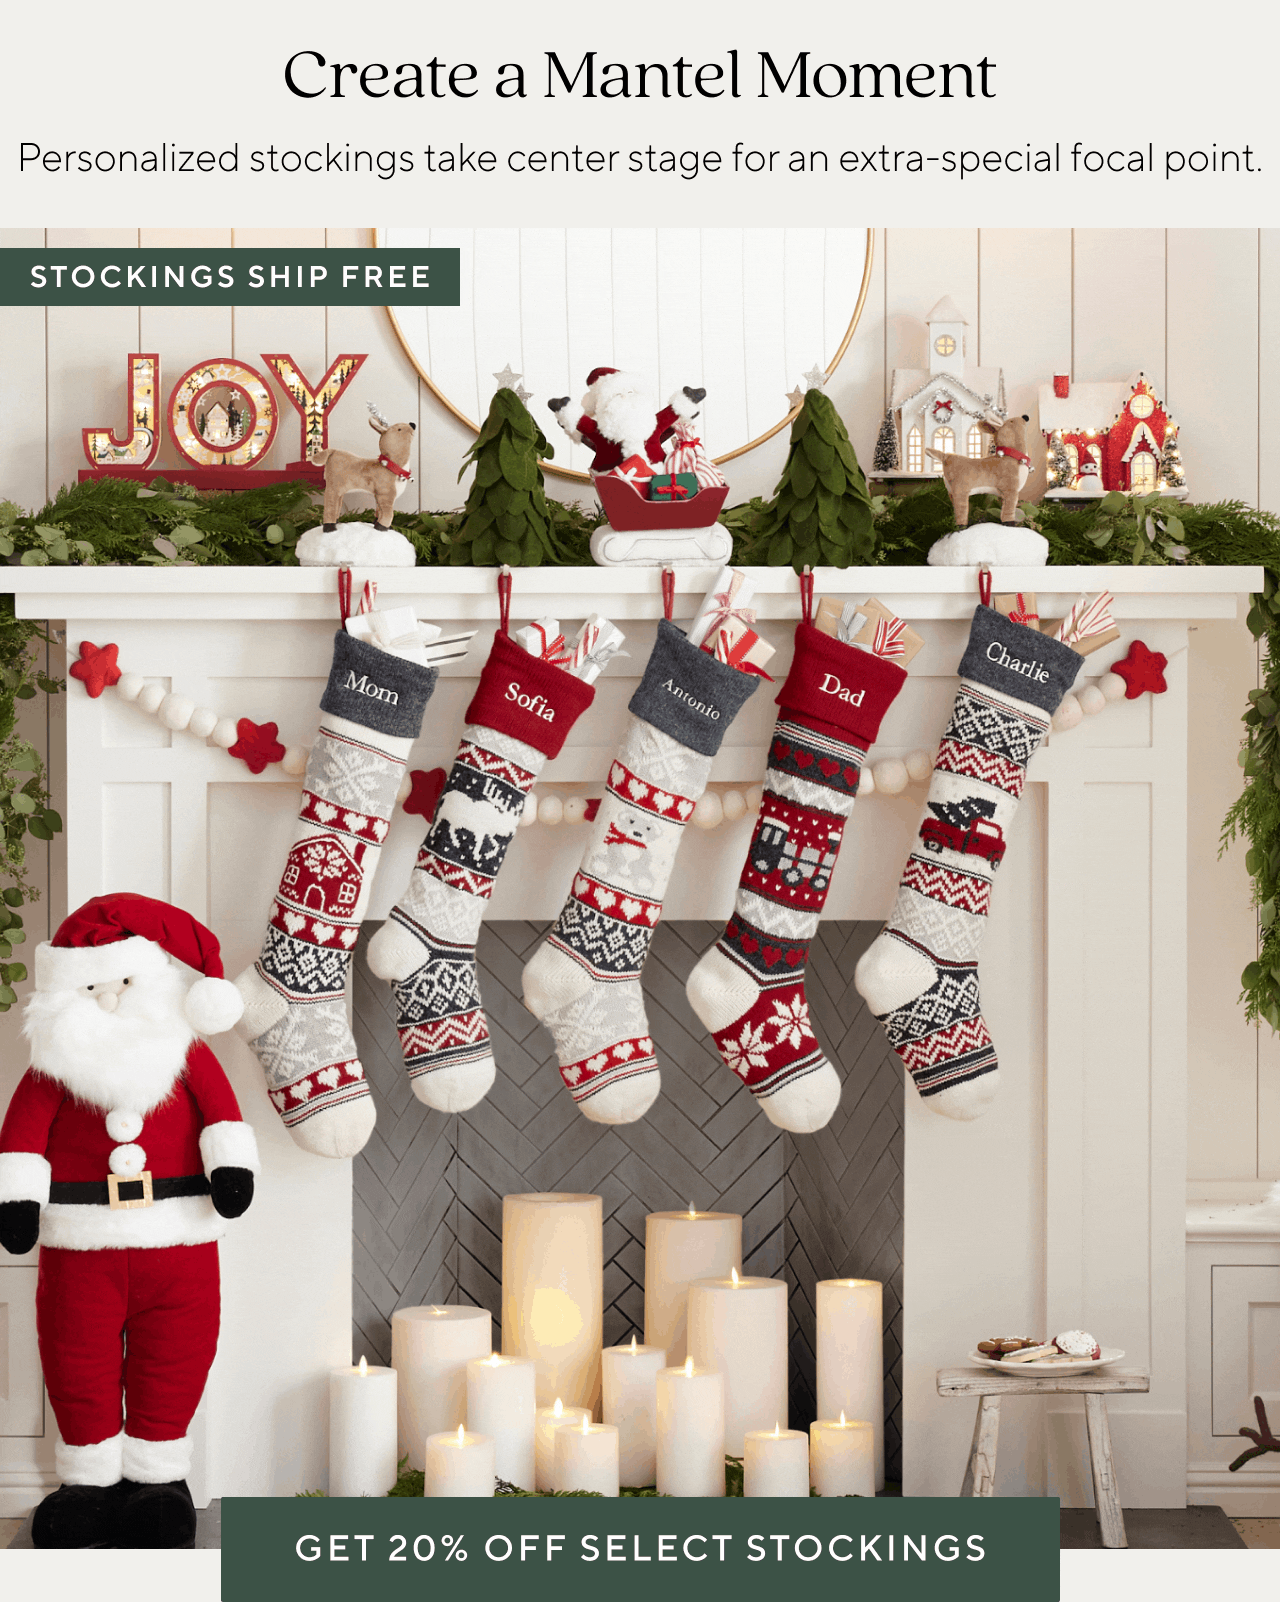 GET 20% OFF SELECT STOCKINGS